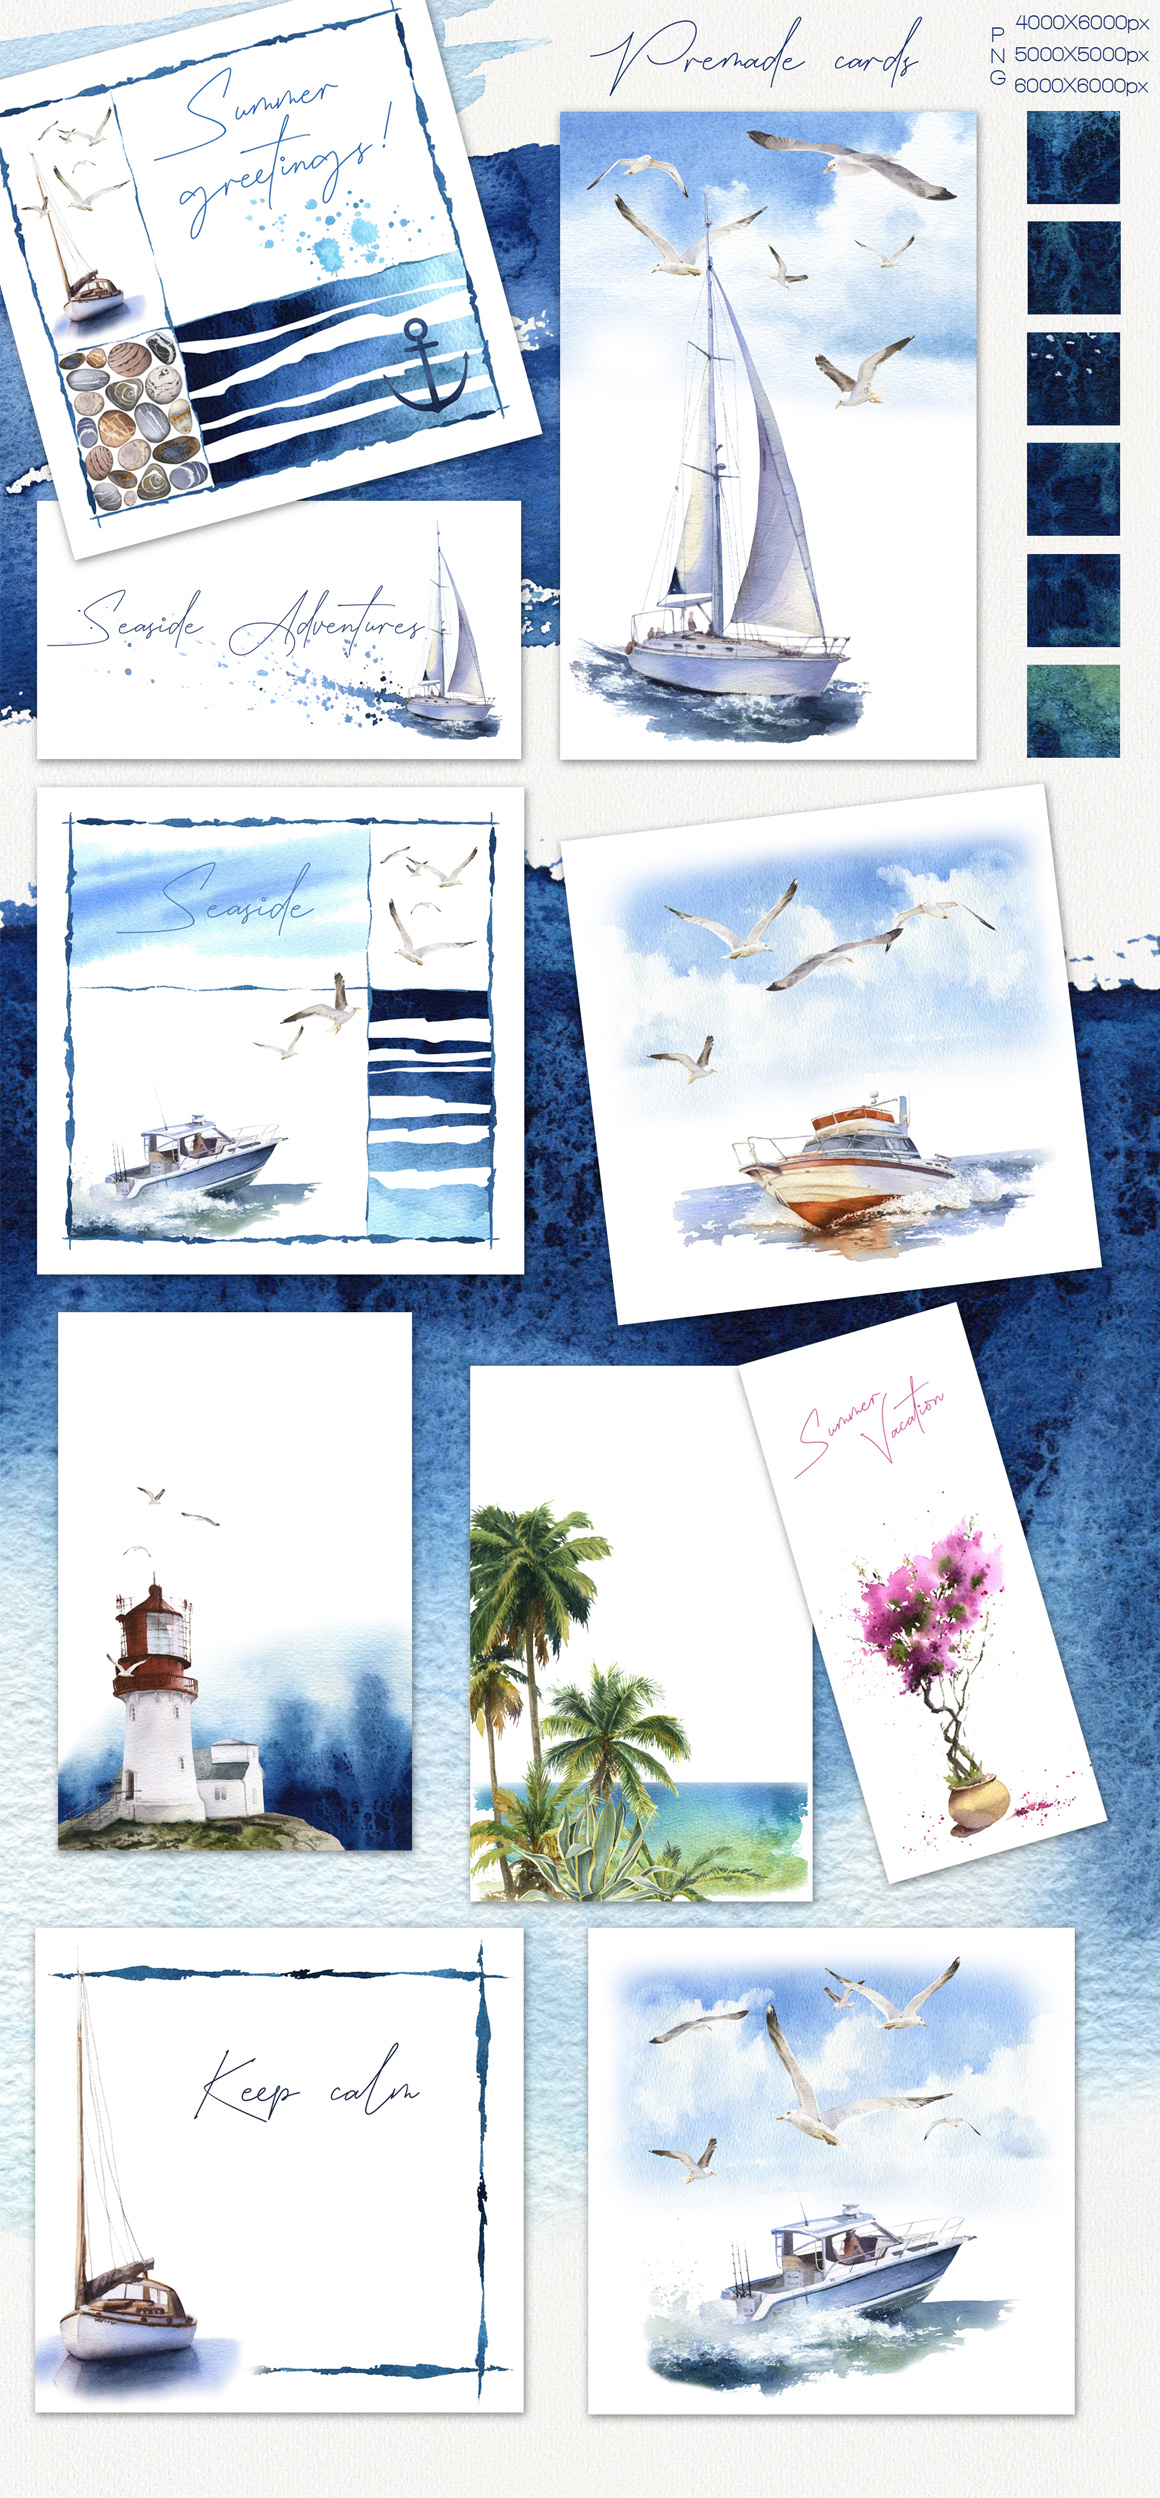 Seaside Watercolor Collection